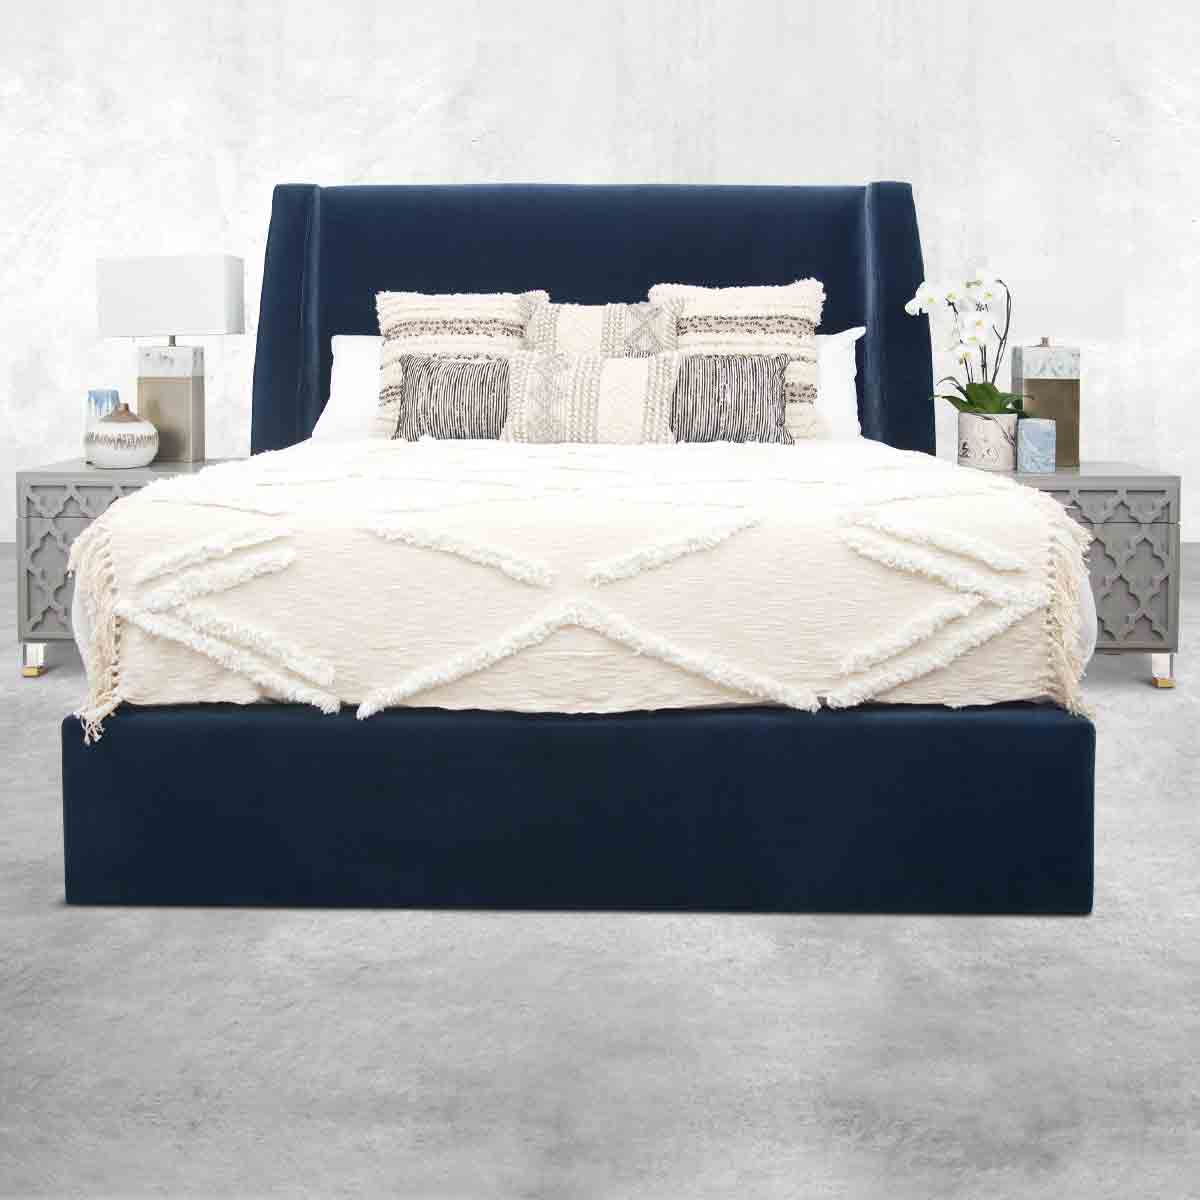 Navy upholstered platform bed with a matching headboard, white blanket, white and gray throw pillows, and gray nightstands on either side of the bed topped with vases, flowers and a lamp.